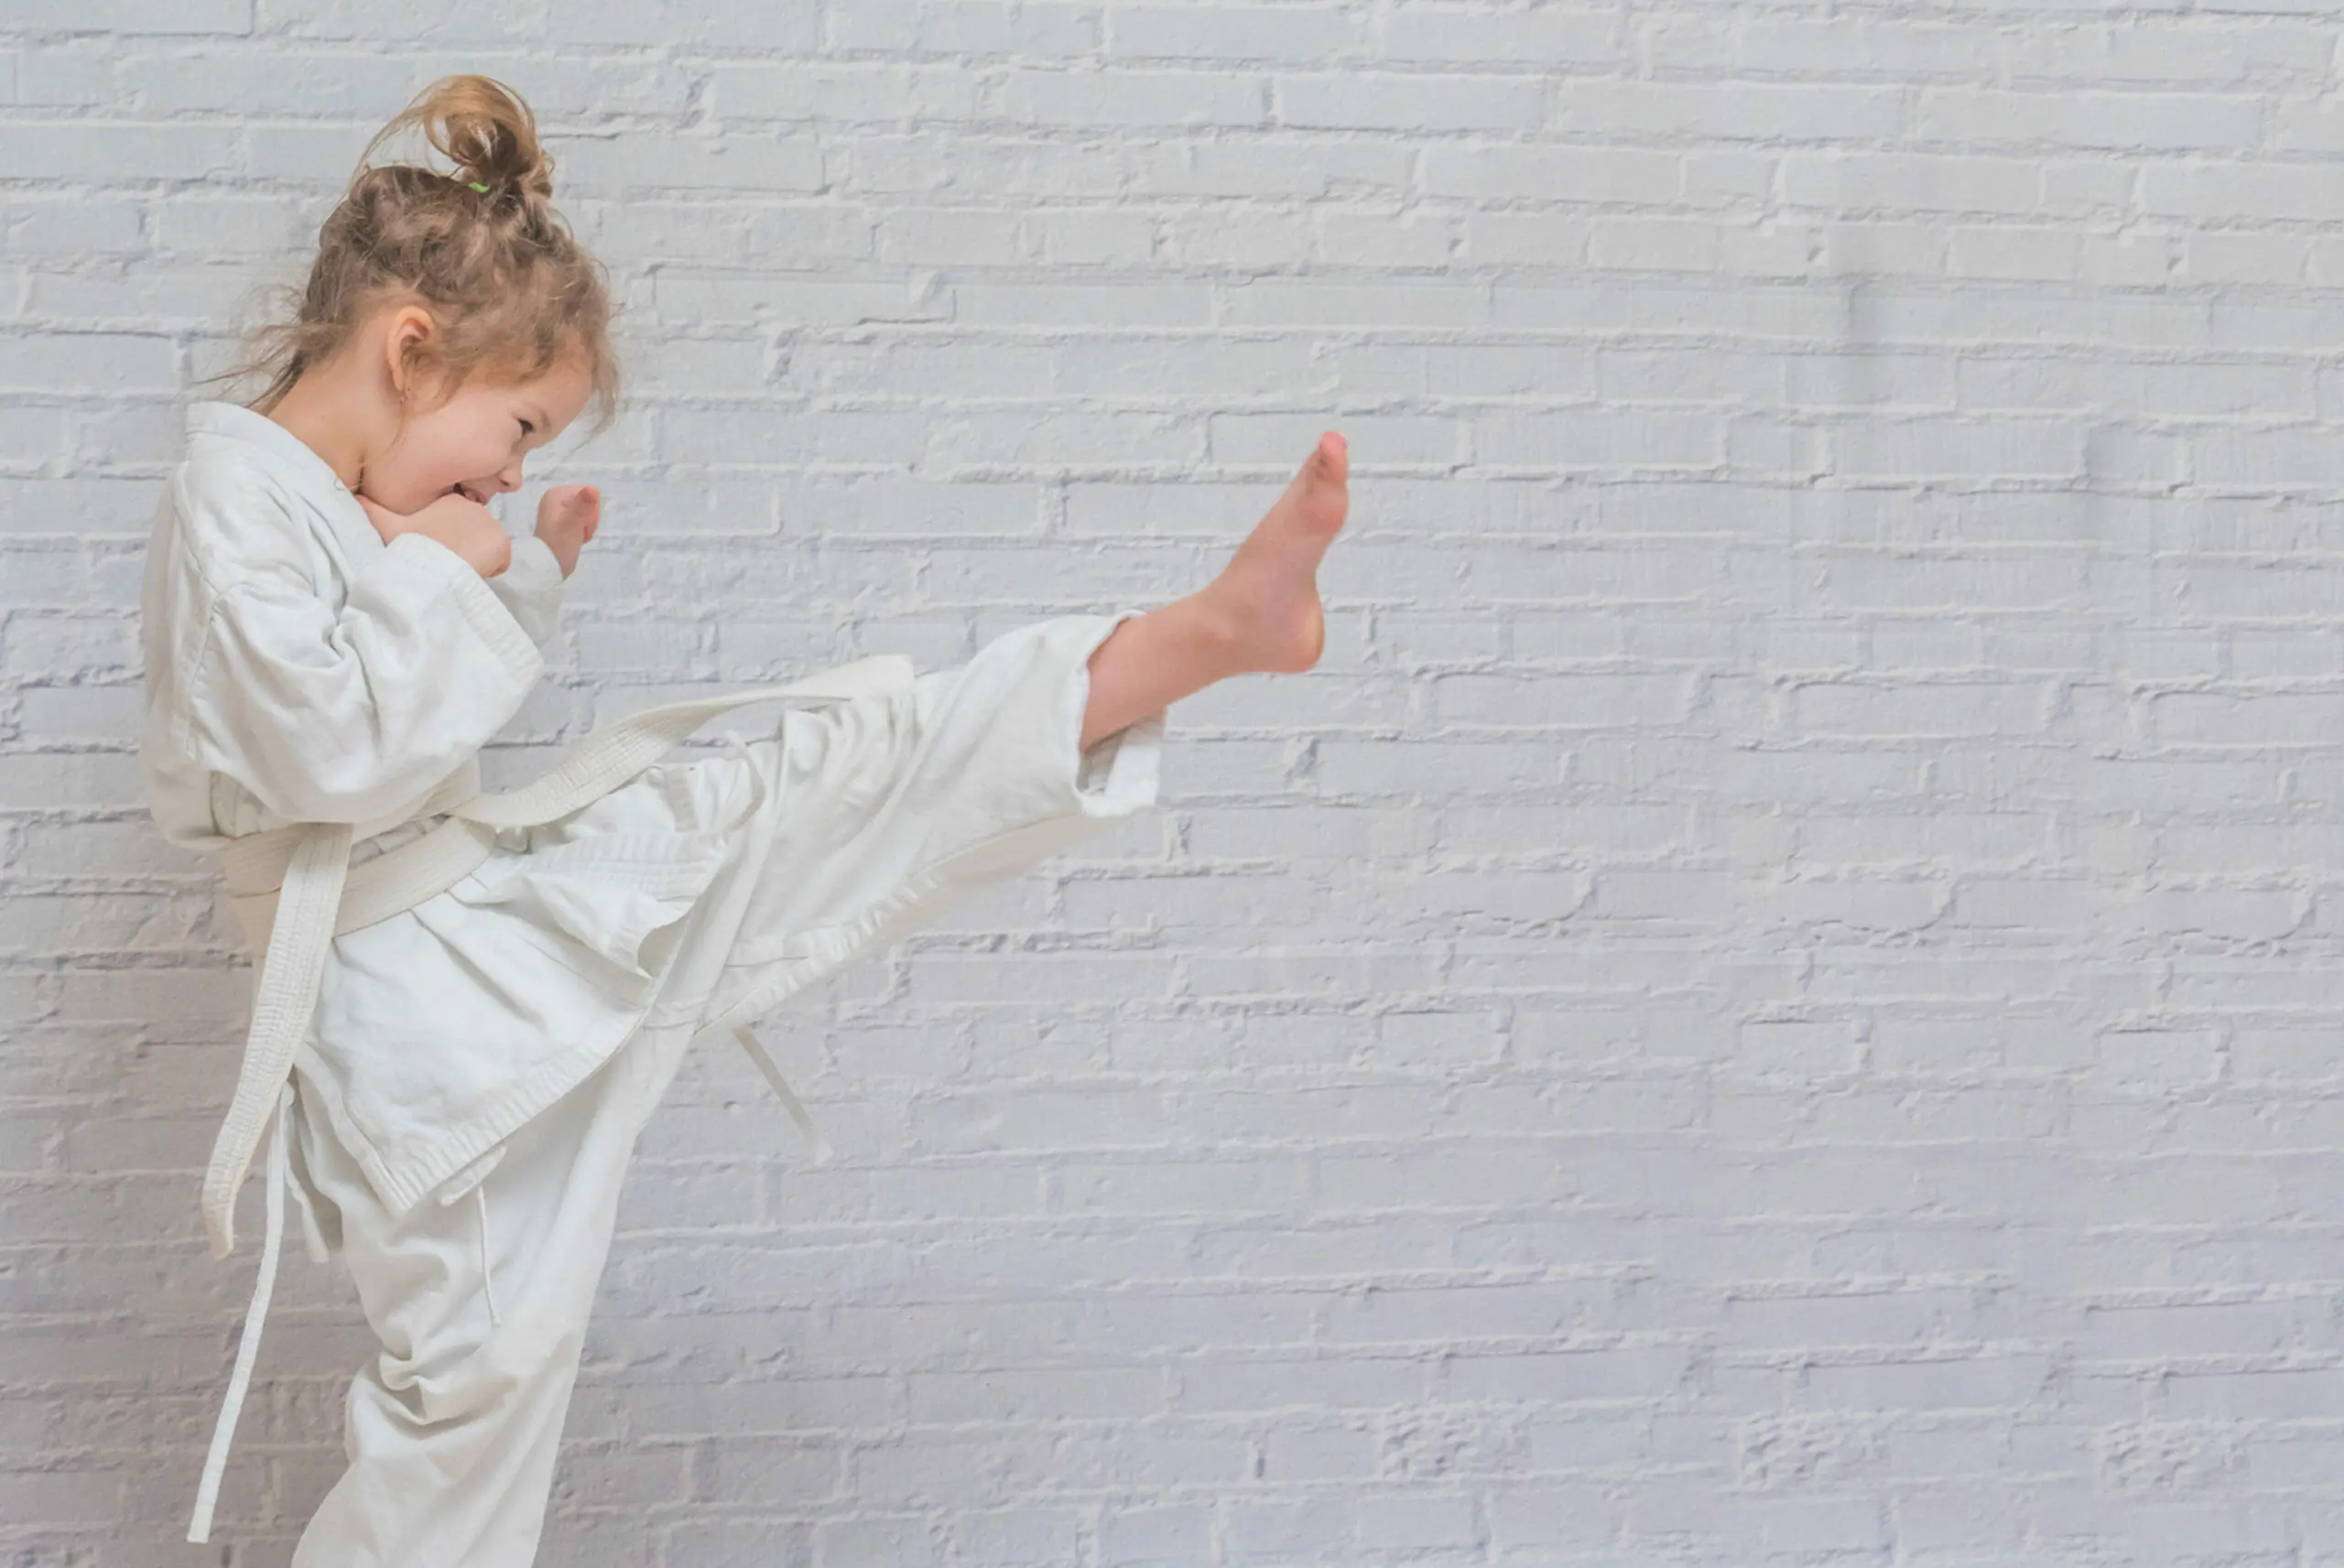 Self-Defence for Toddlers: Techniques and Benefits